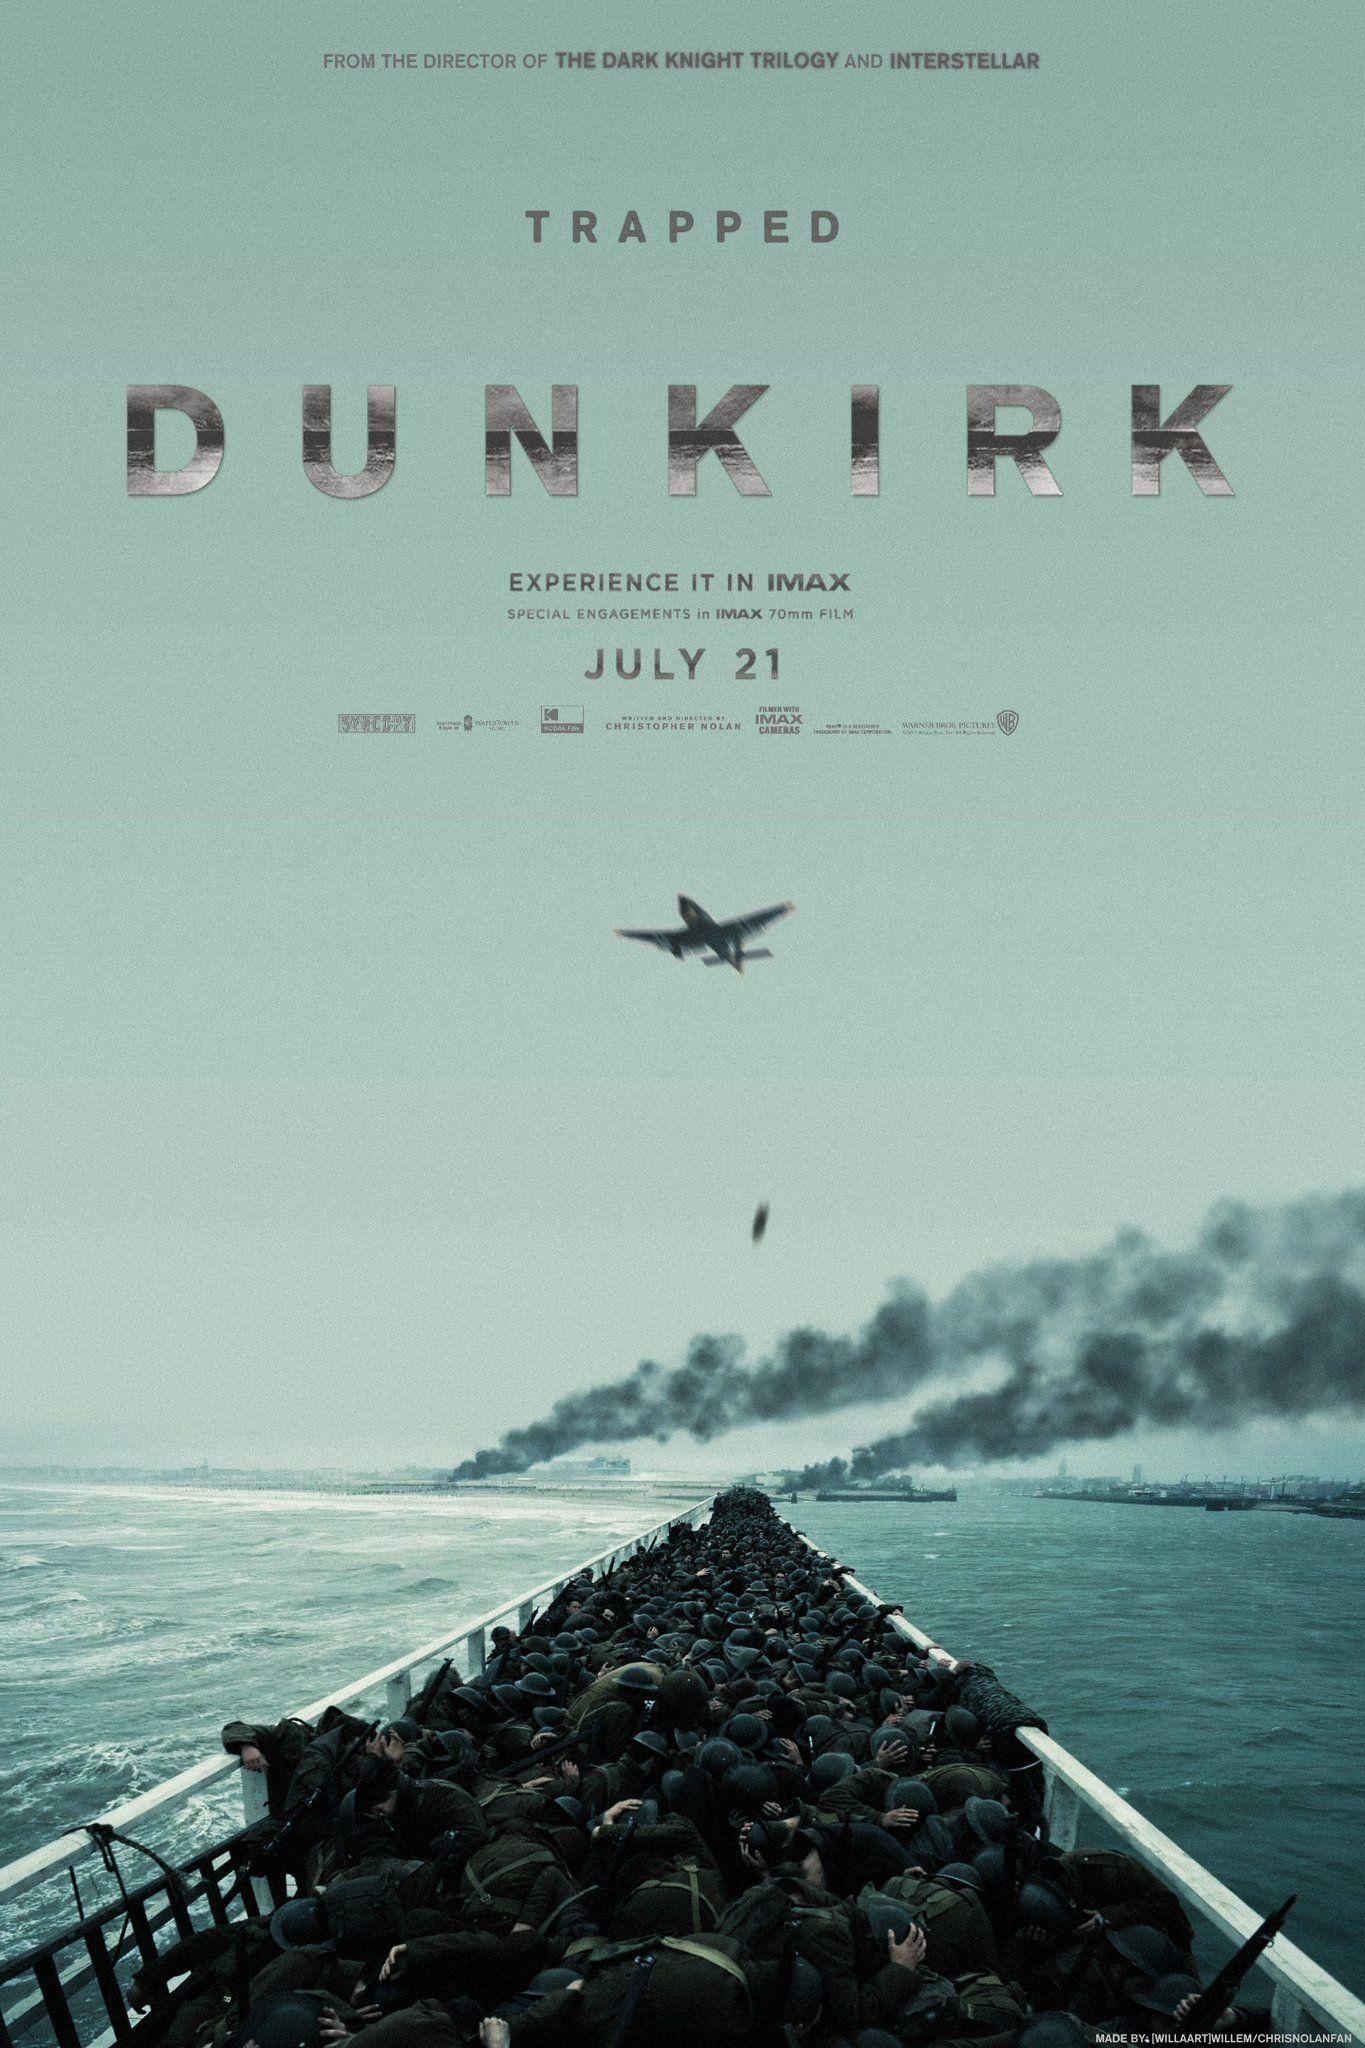 Dunkirk Poster Wallpaper Image Gallery